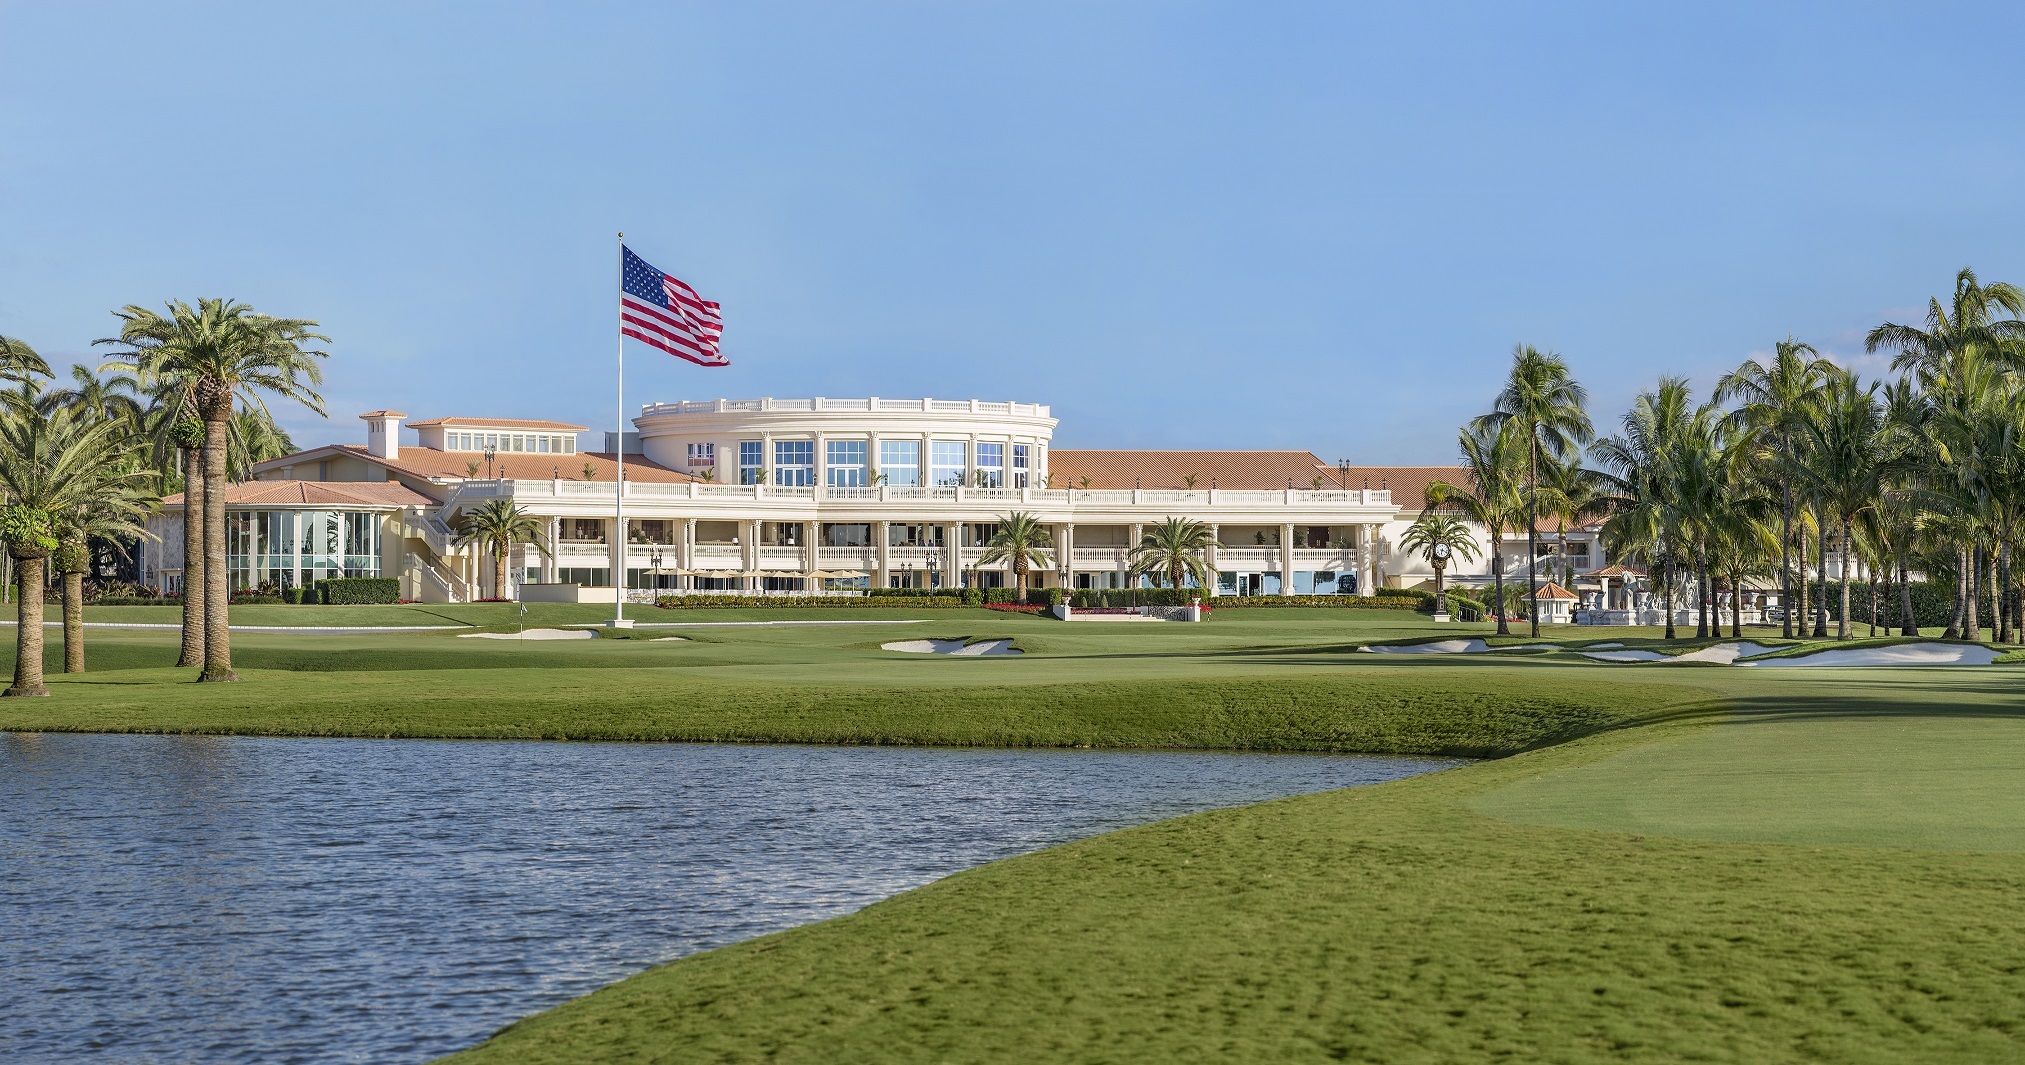 Golf Vacation Package - Great Deal at Doral: Blue Monster Stay & Play + FREE REPLAYS from $449 per day!